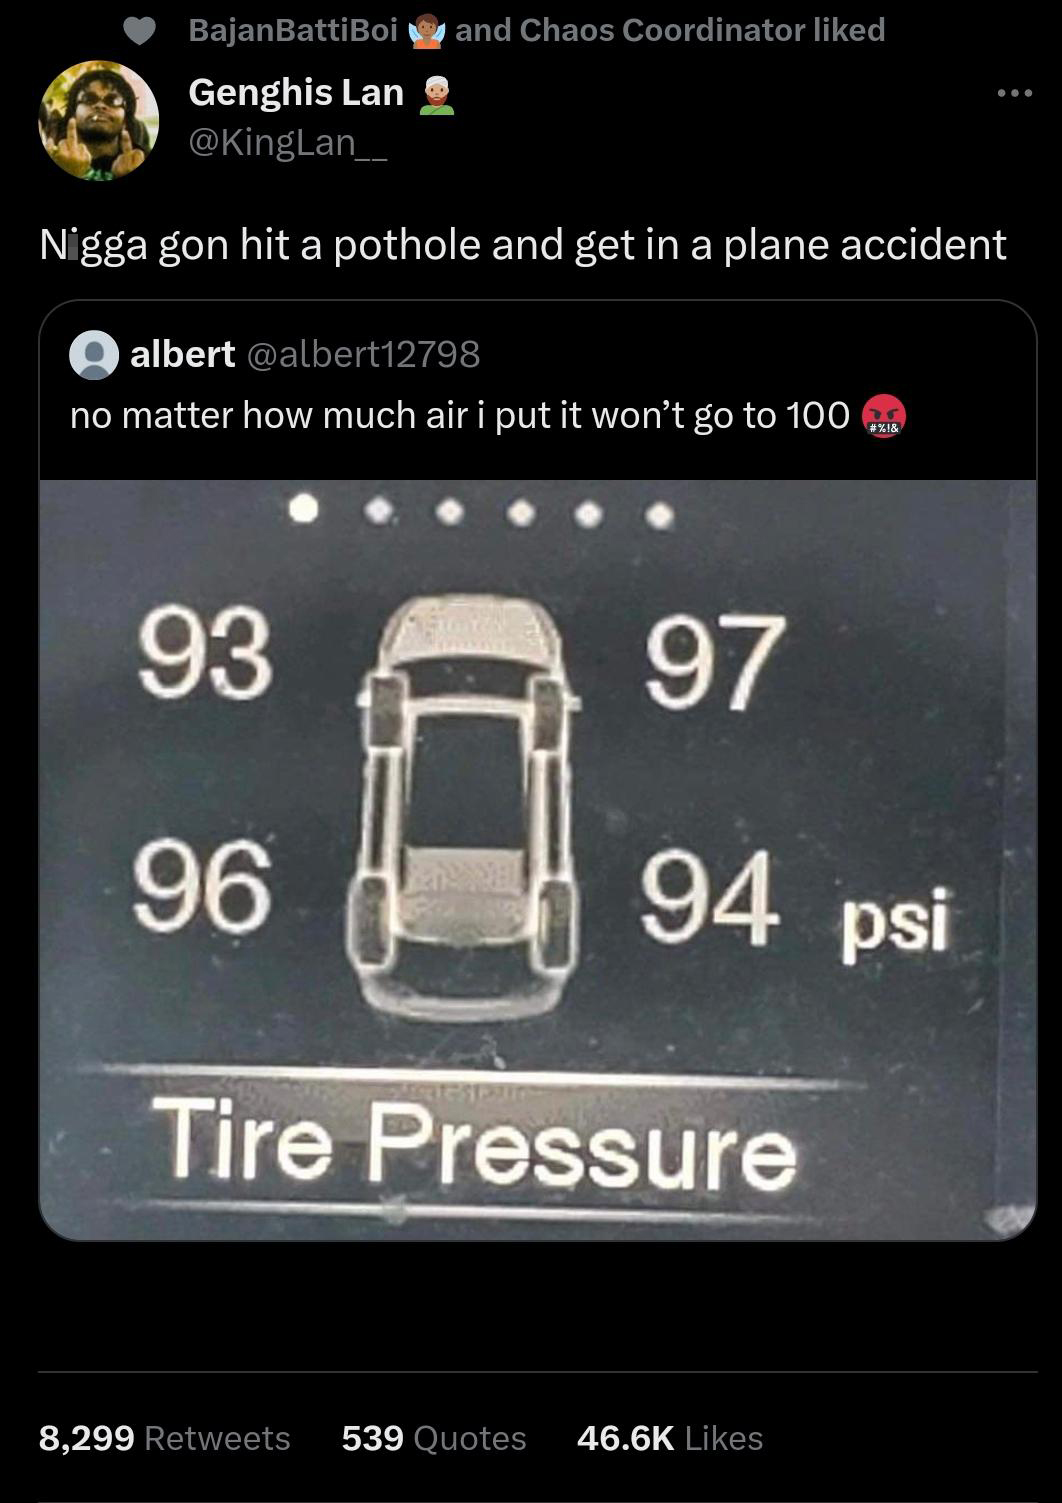 funny tweets and memes - can t get my tires to 100 - BajanBattiBoi Genghis Lan Nigga gon hit a pothole and get in a plane accident and Chaos Coordinator d albert no matter how much air i put it won't go to 100 93 96 Des 97 94 psi Tire Pressure #%1& 8,299 